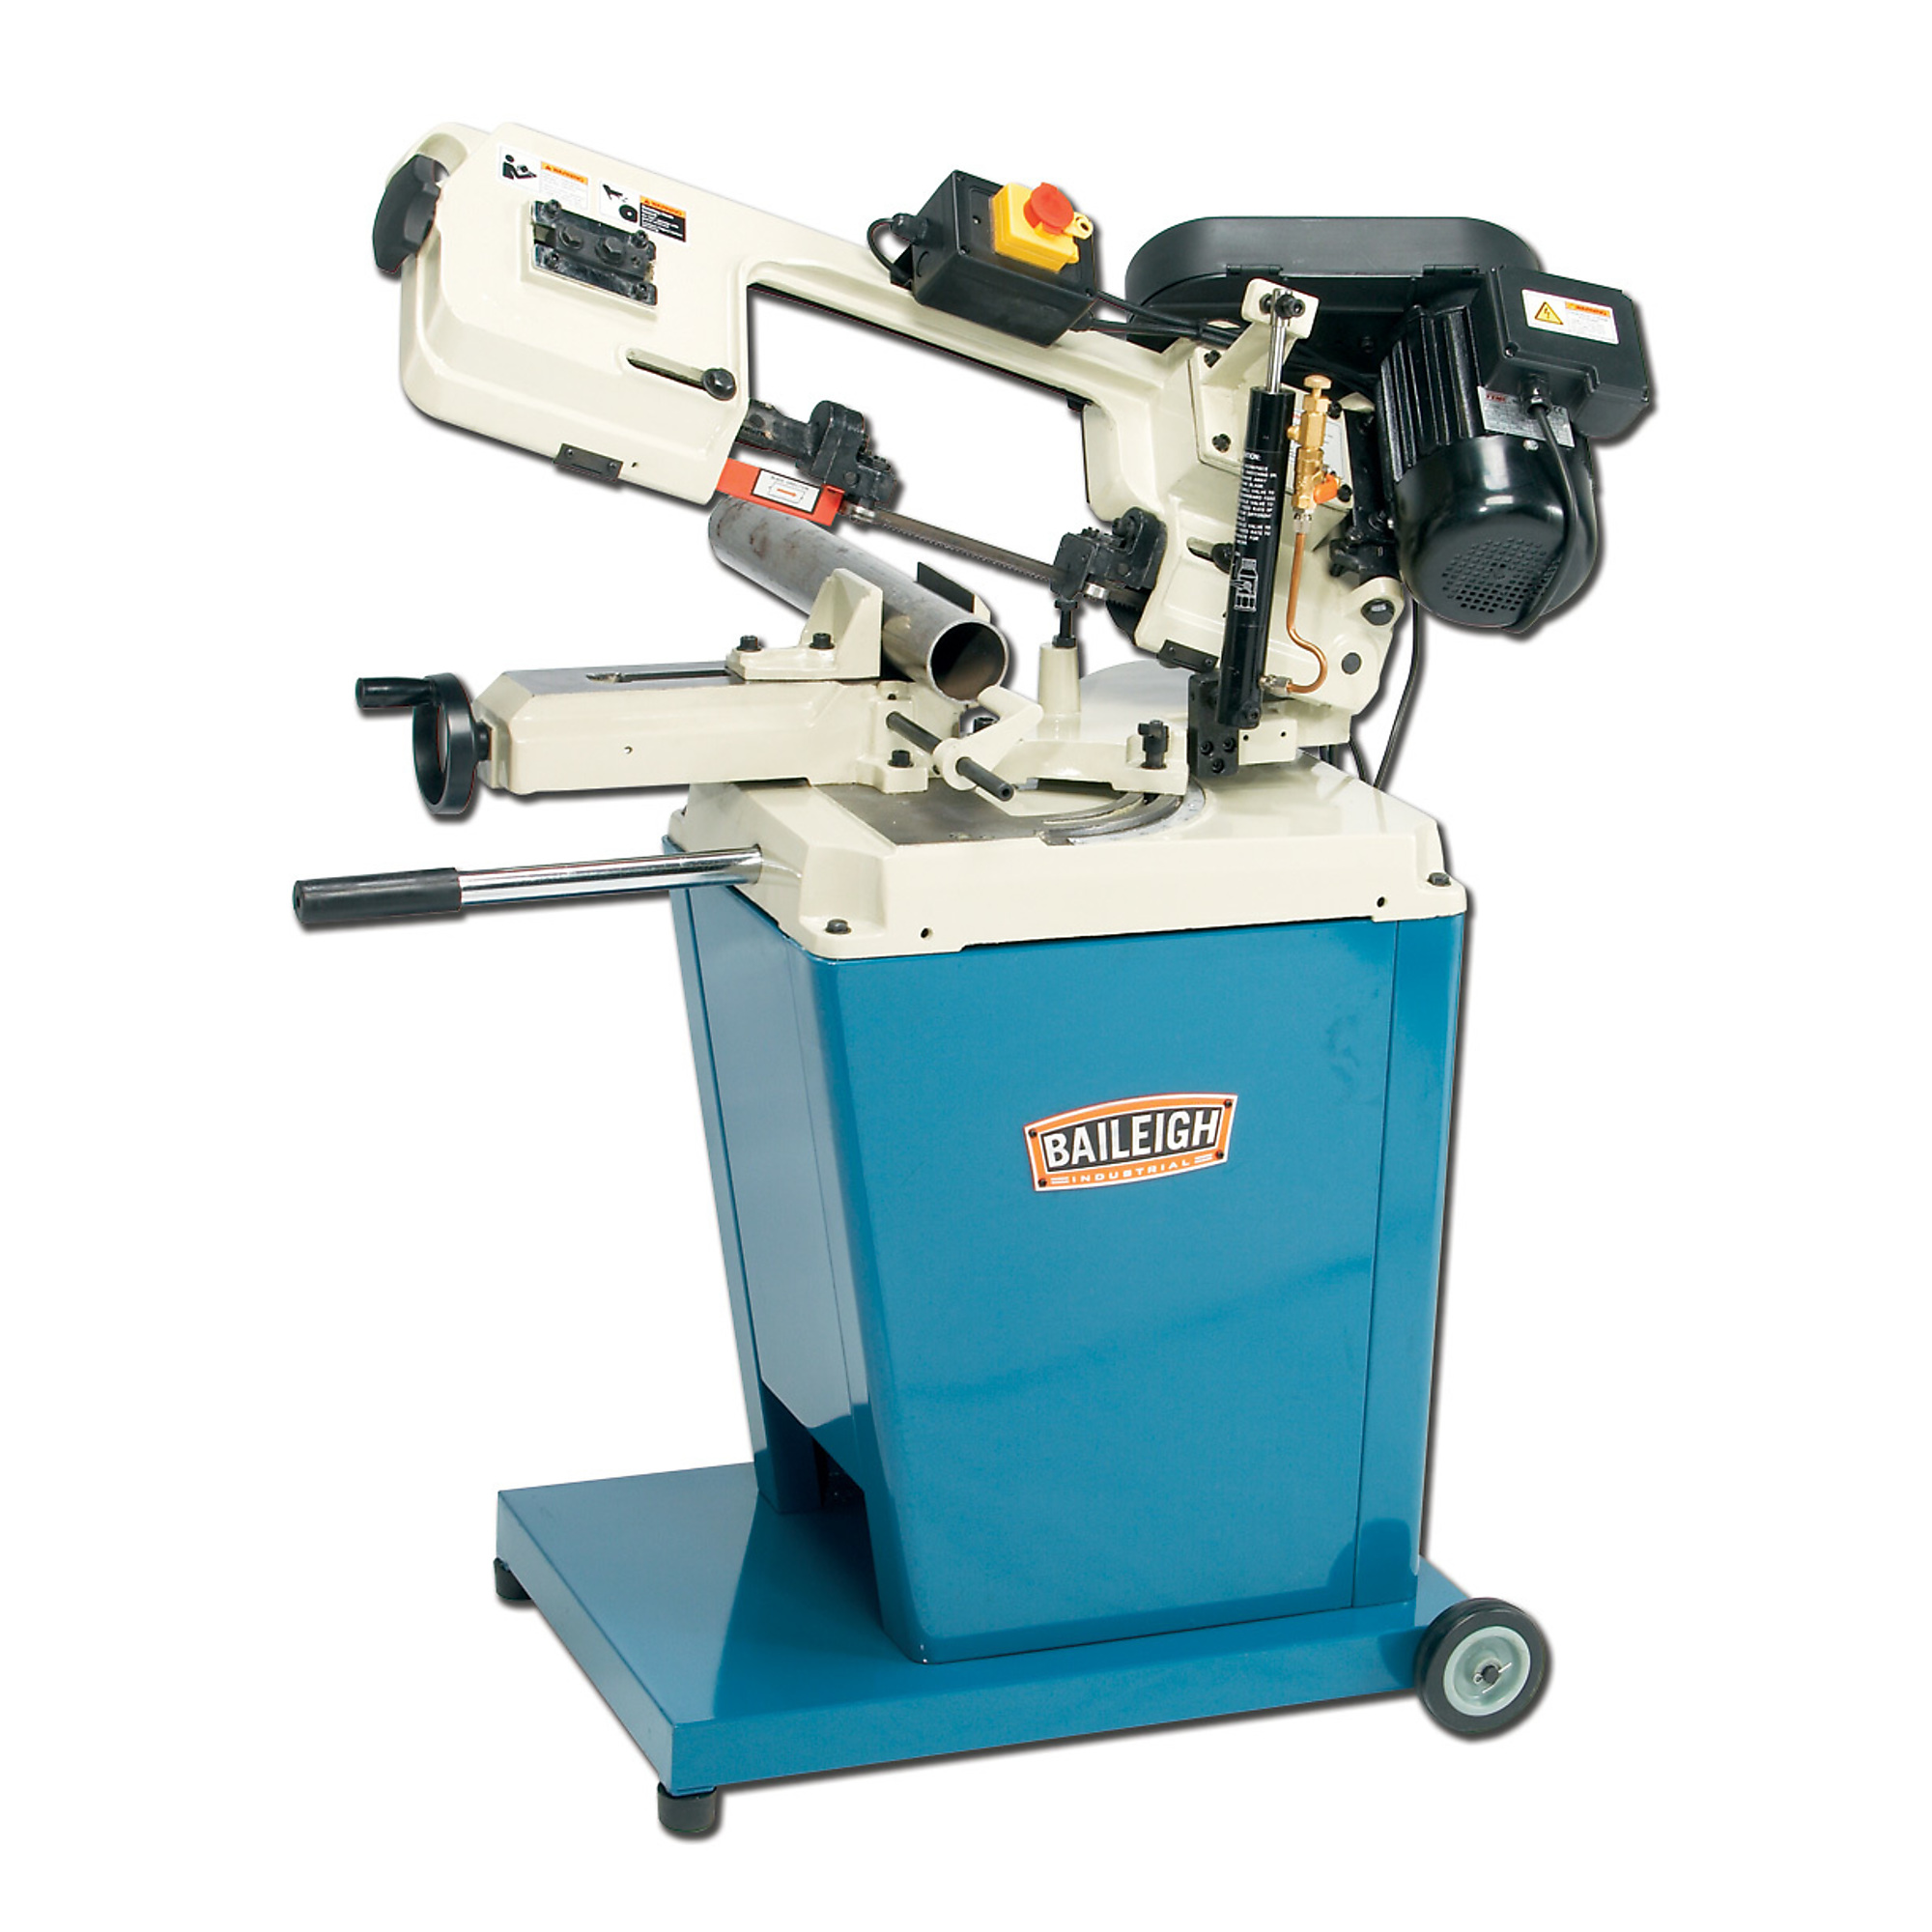 Baileigh, Metal Cutting Saw Vertical Cutting Option, Horsepower 0.75 HP, Volts 110 Power Type Corded, Model BS-128M -  1001095